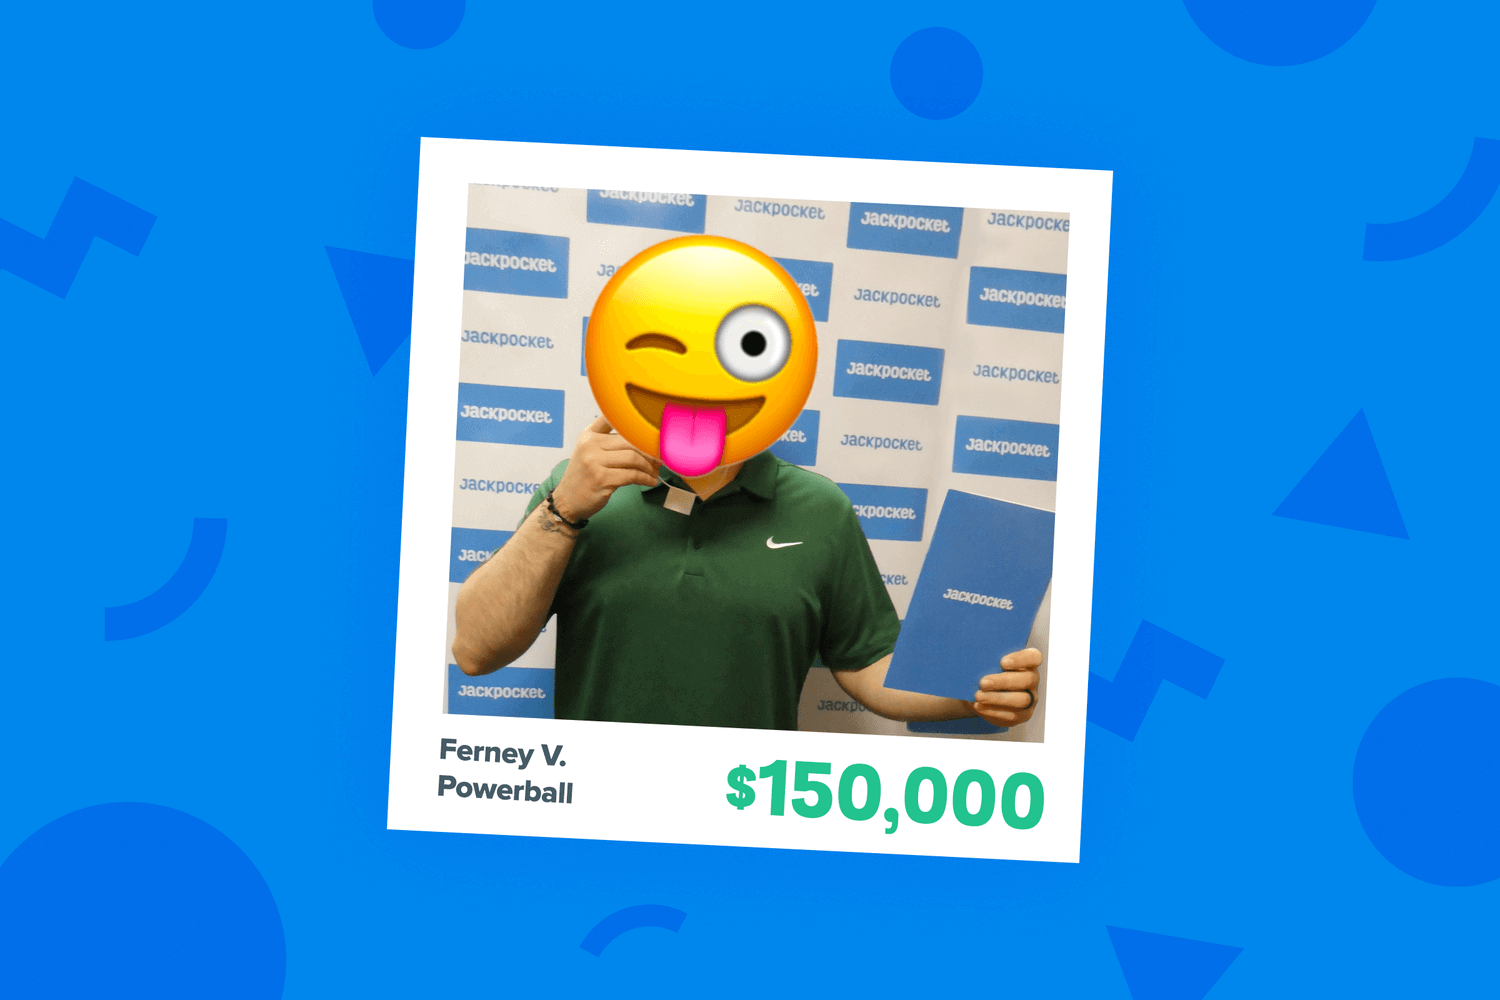 Ferney won $150K playing Powerball on Jackpocket